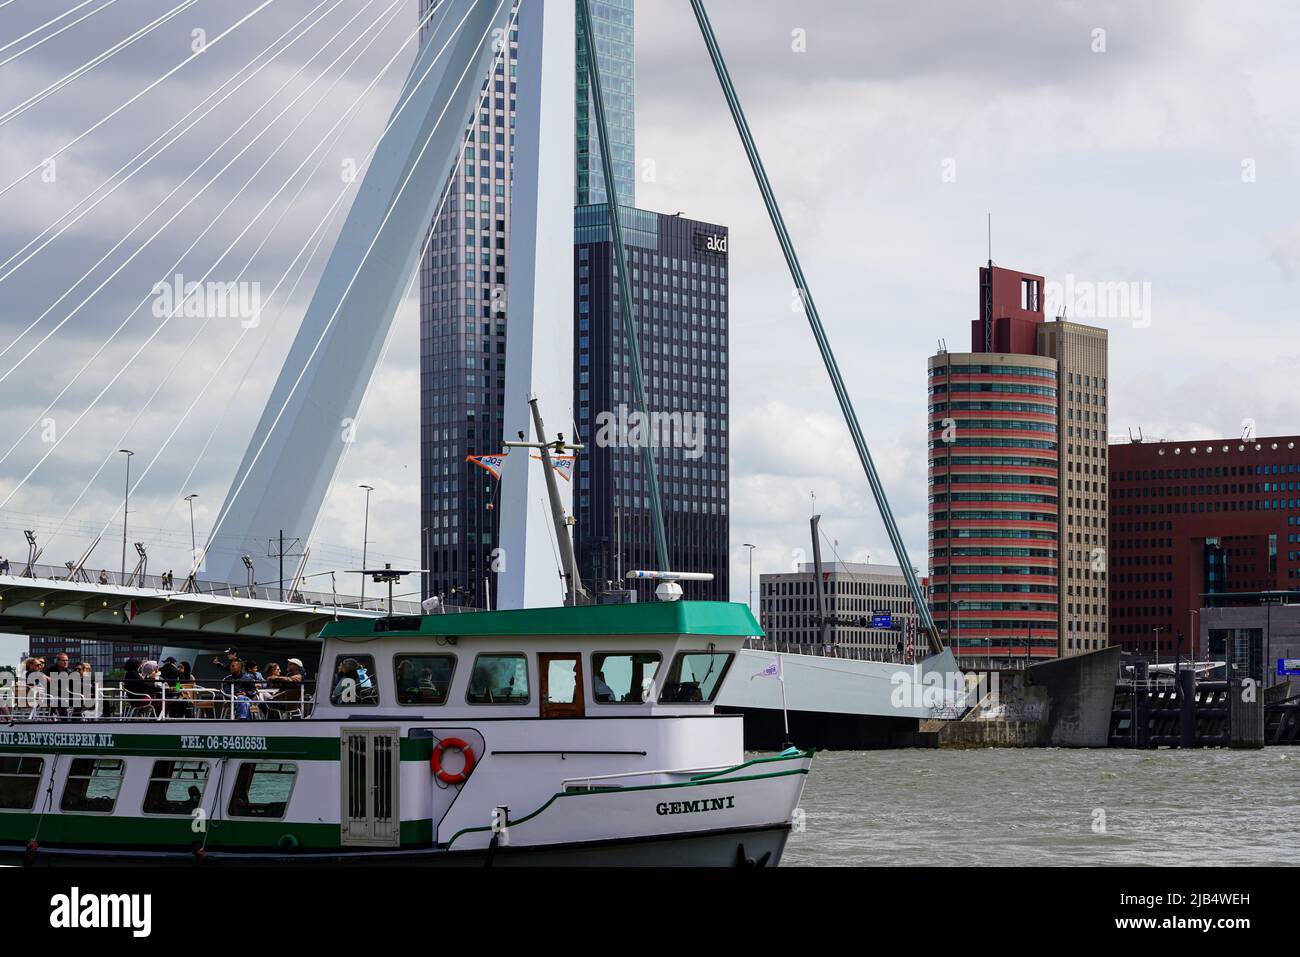 The excursion ship Gemini passes the Erasmus Bridge on the Maas river in Rotterdam, Netherlands on May 26, 2022. Stock Photo